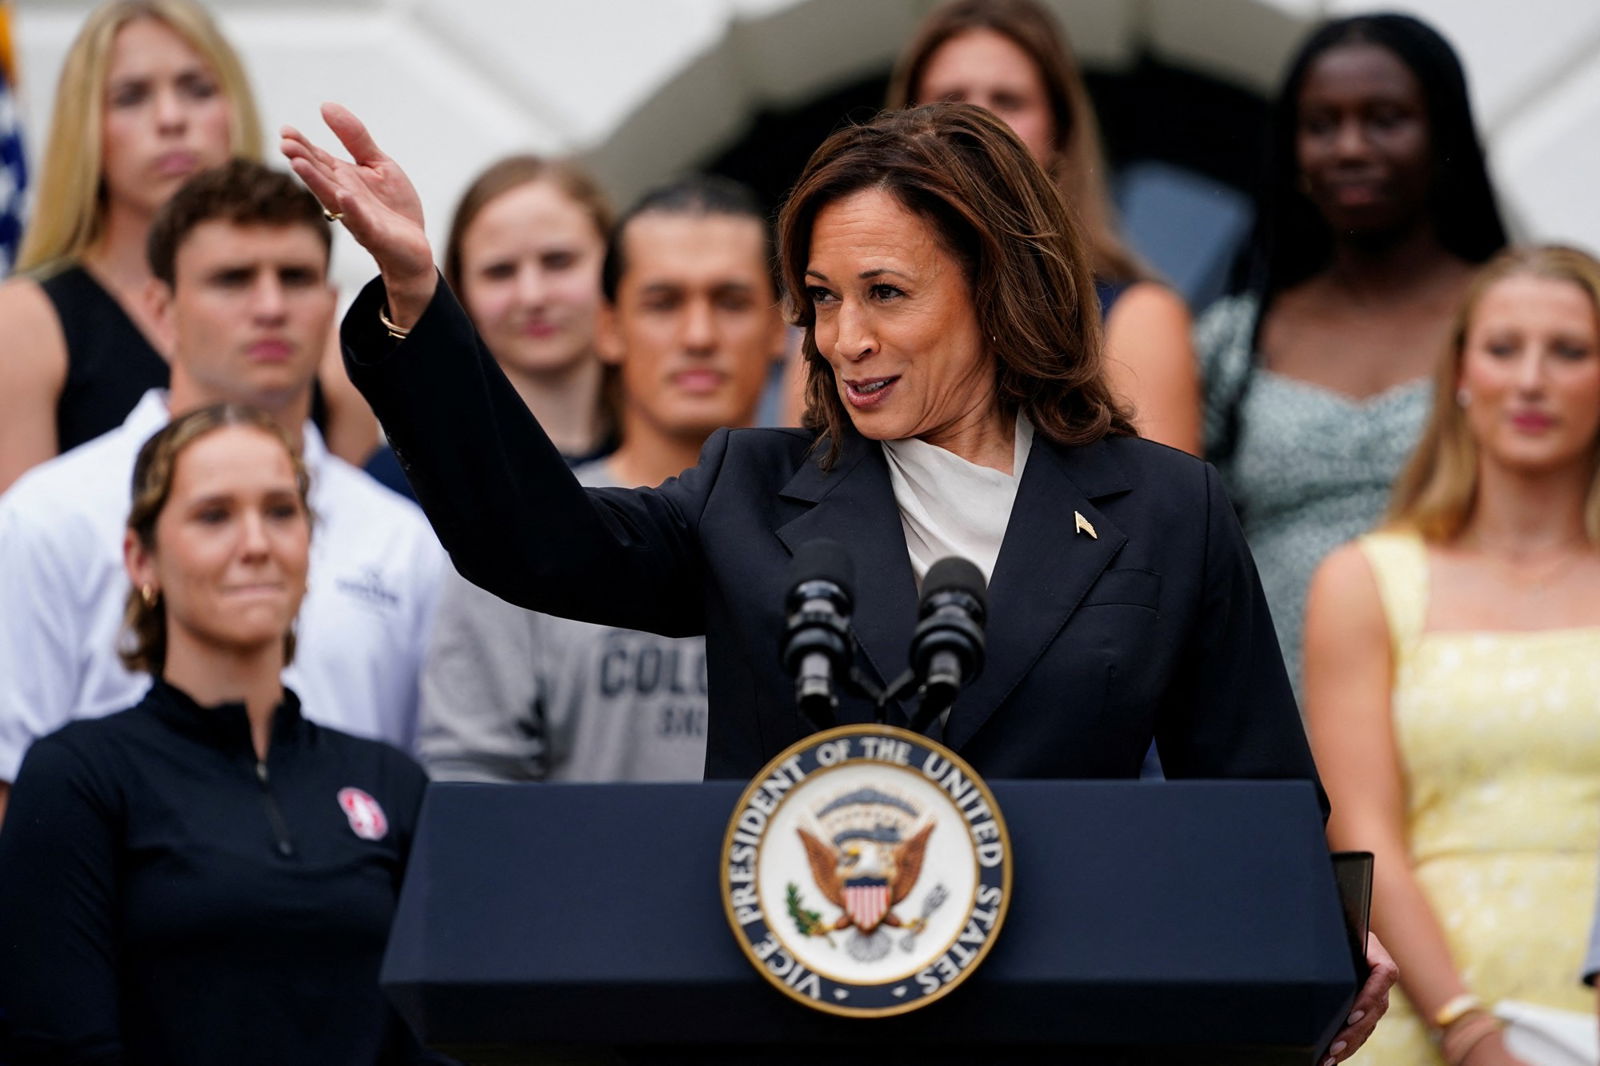 Kamala Harris smiles while raising a hand high, standing at a podium in front of a crowd